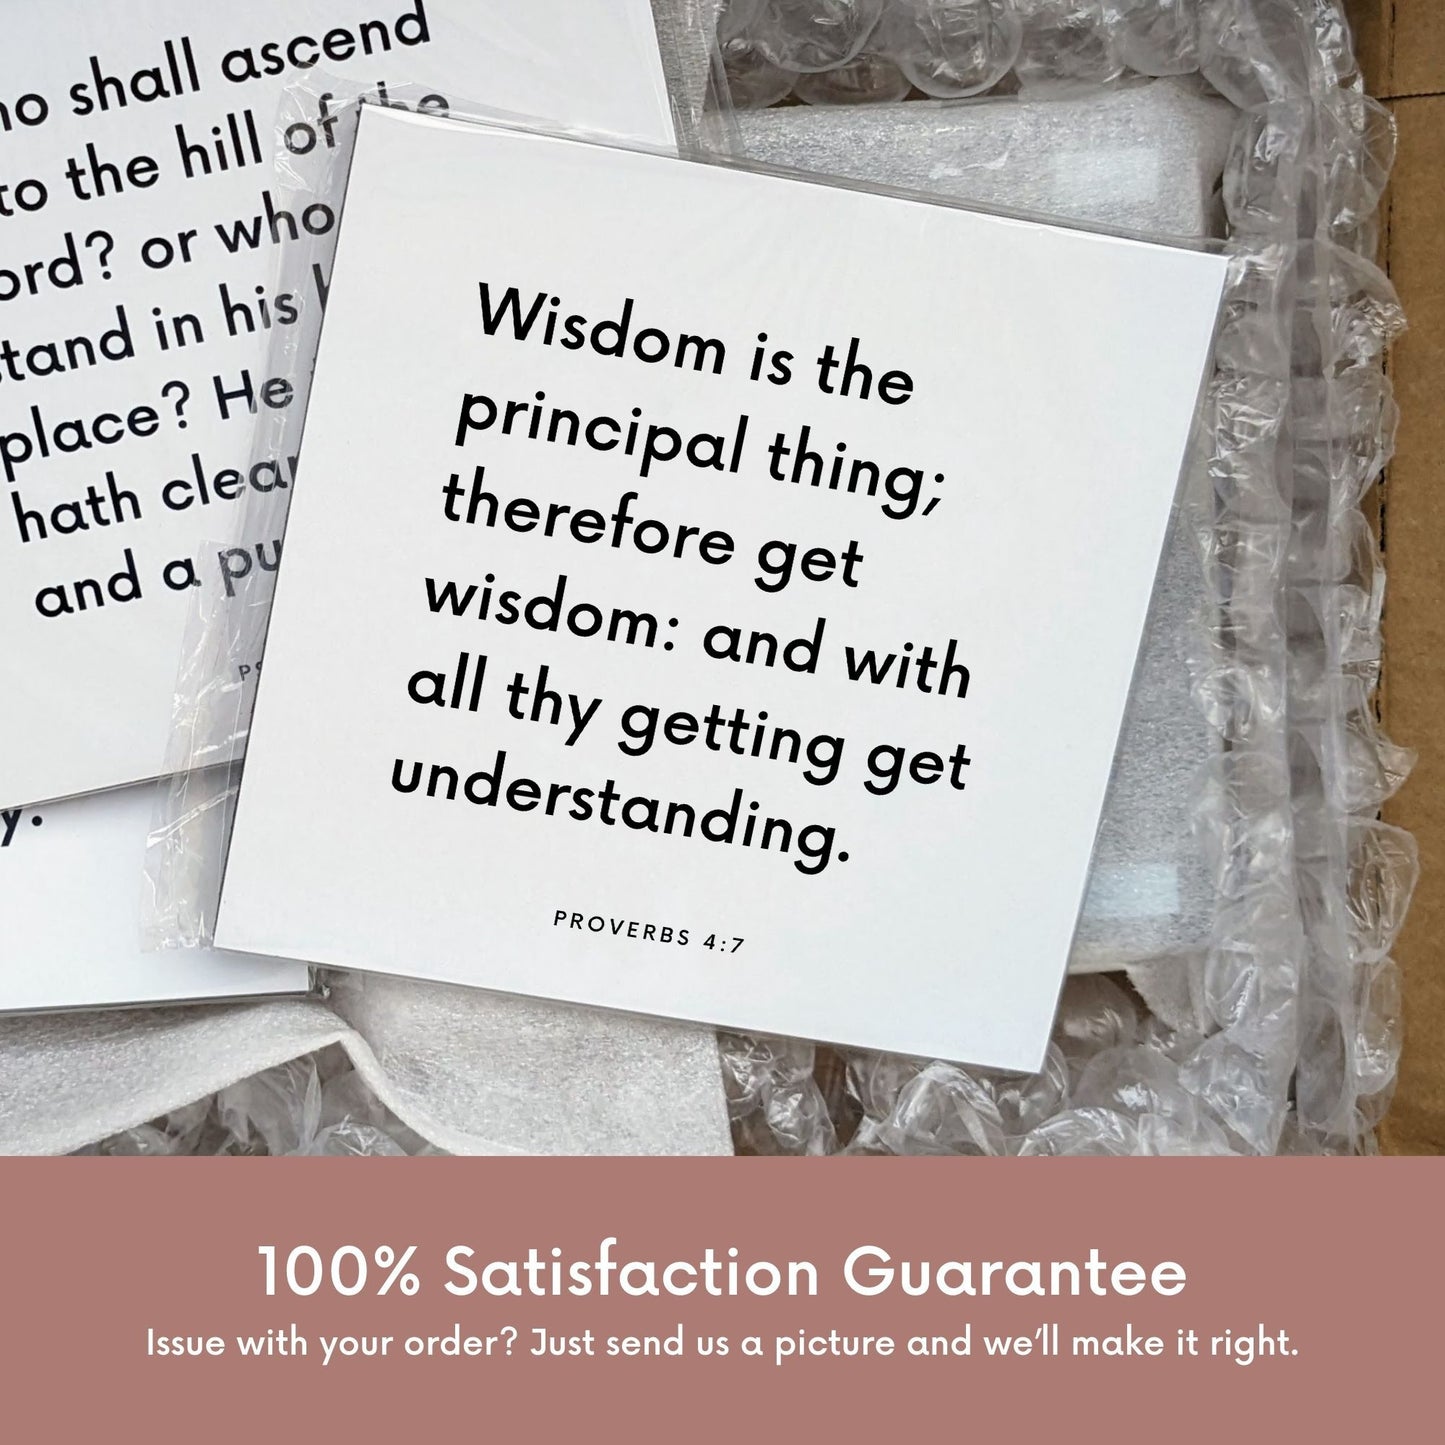 Shipping materials for scripture tile of Proverbs 4:7 - "Wisdom is the principal thing; therefore get wisdom"